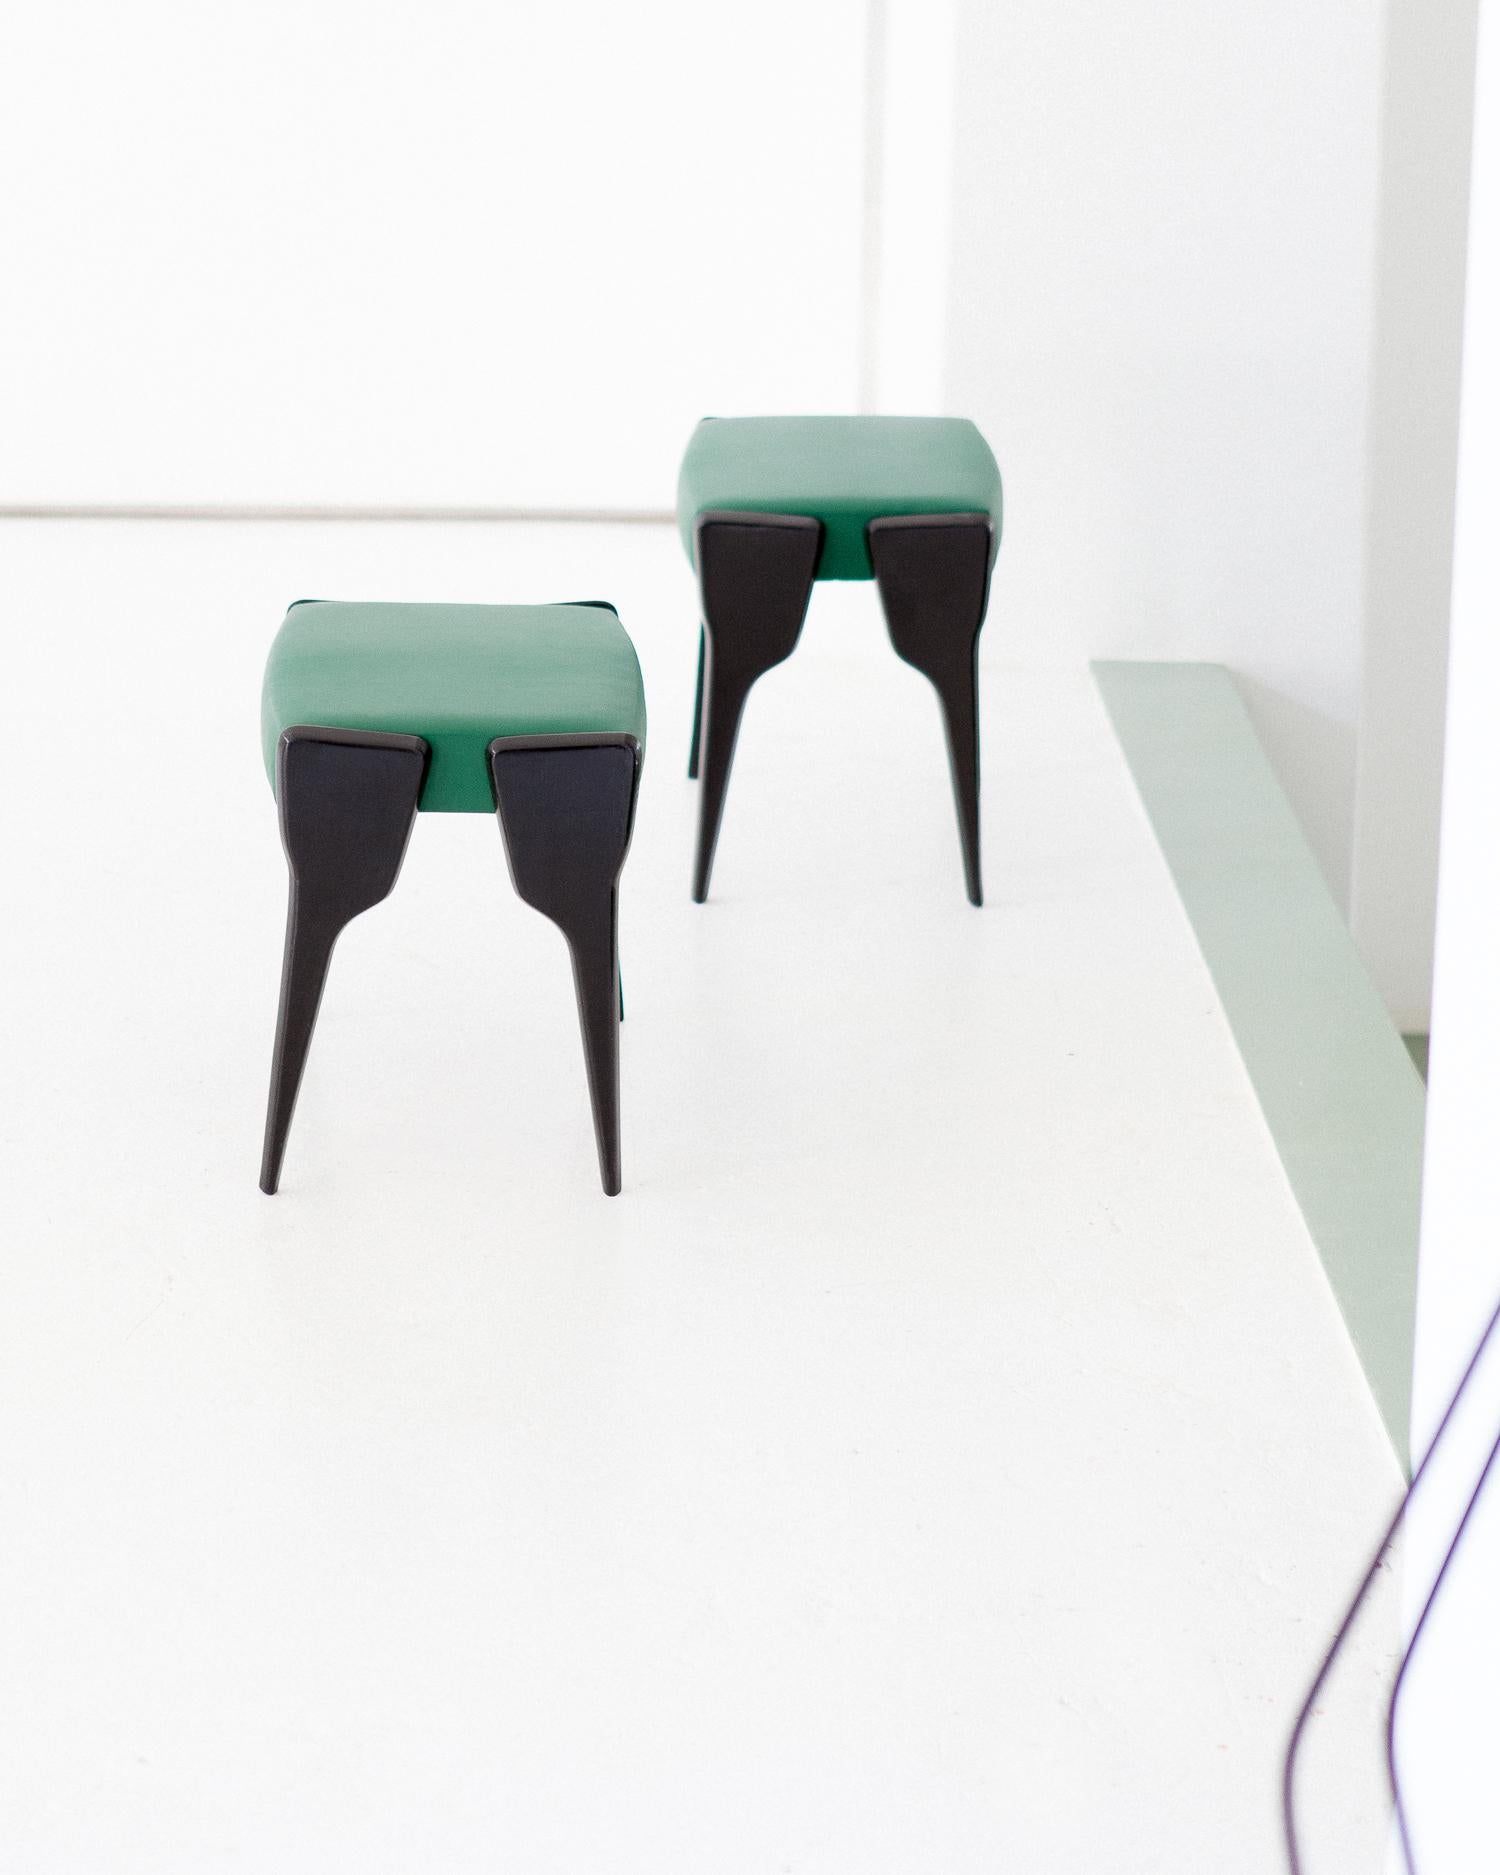 Pair of Italian Modern Stool with Black Mahogany Legs and Natural Green Leather 3